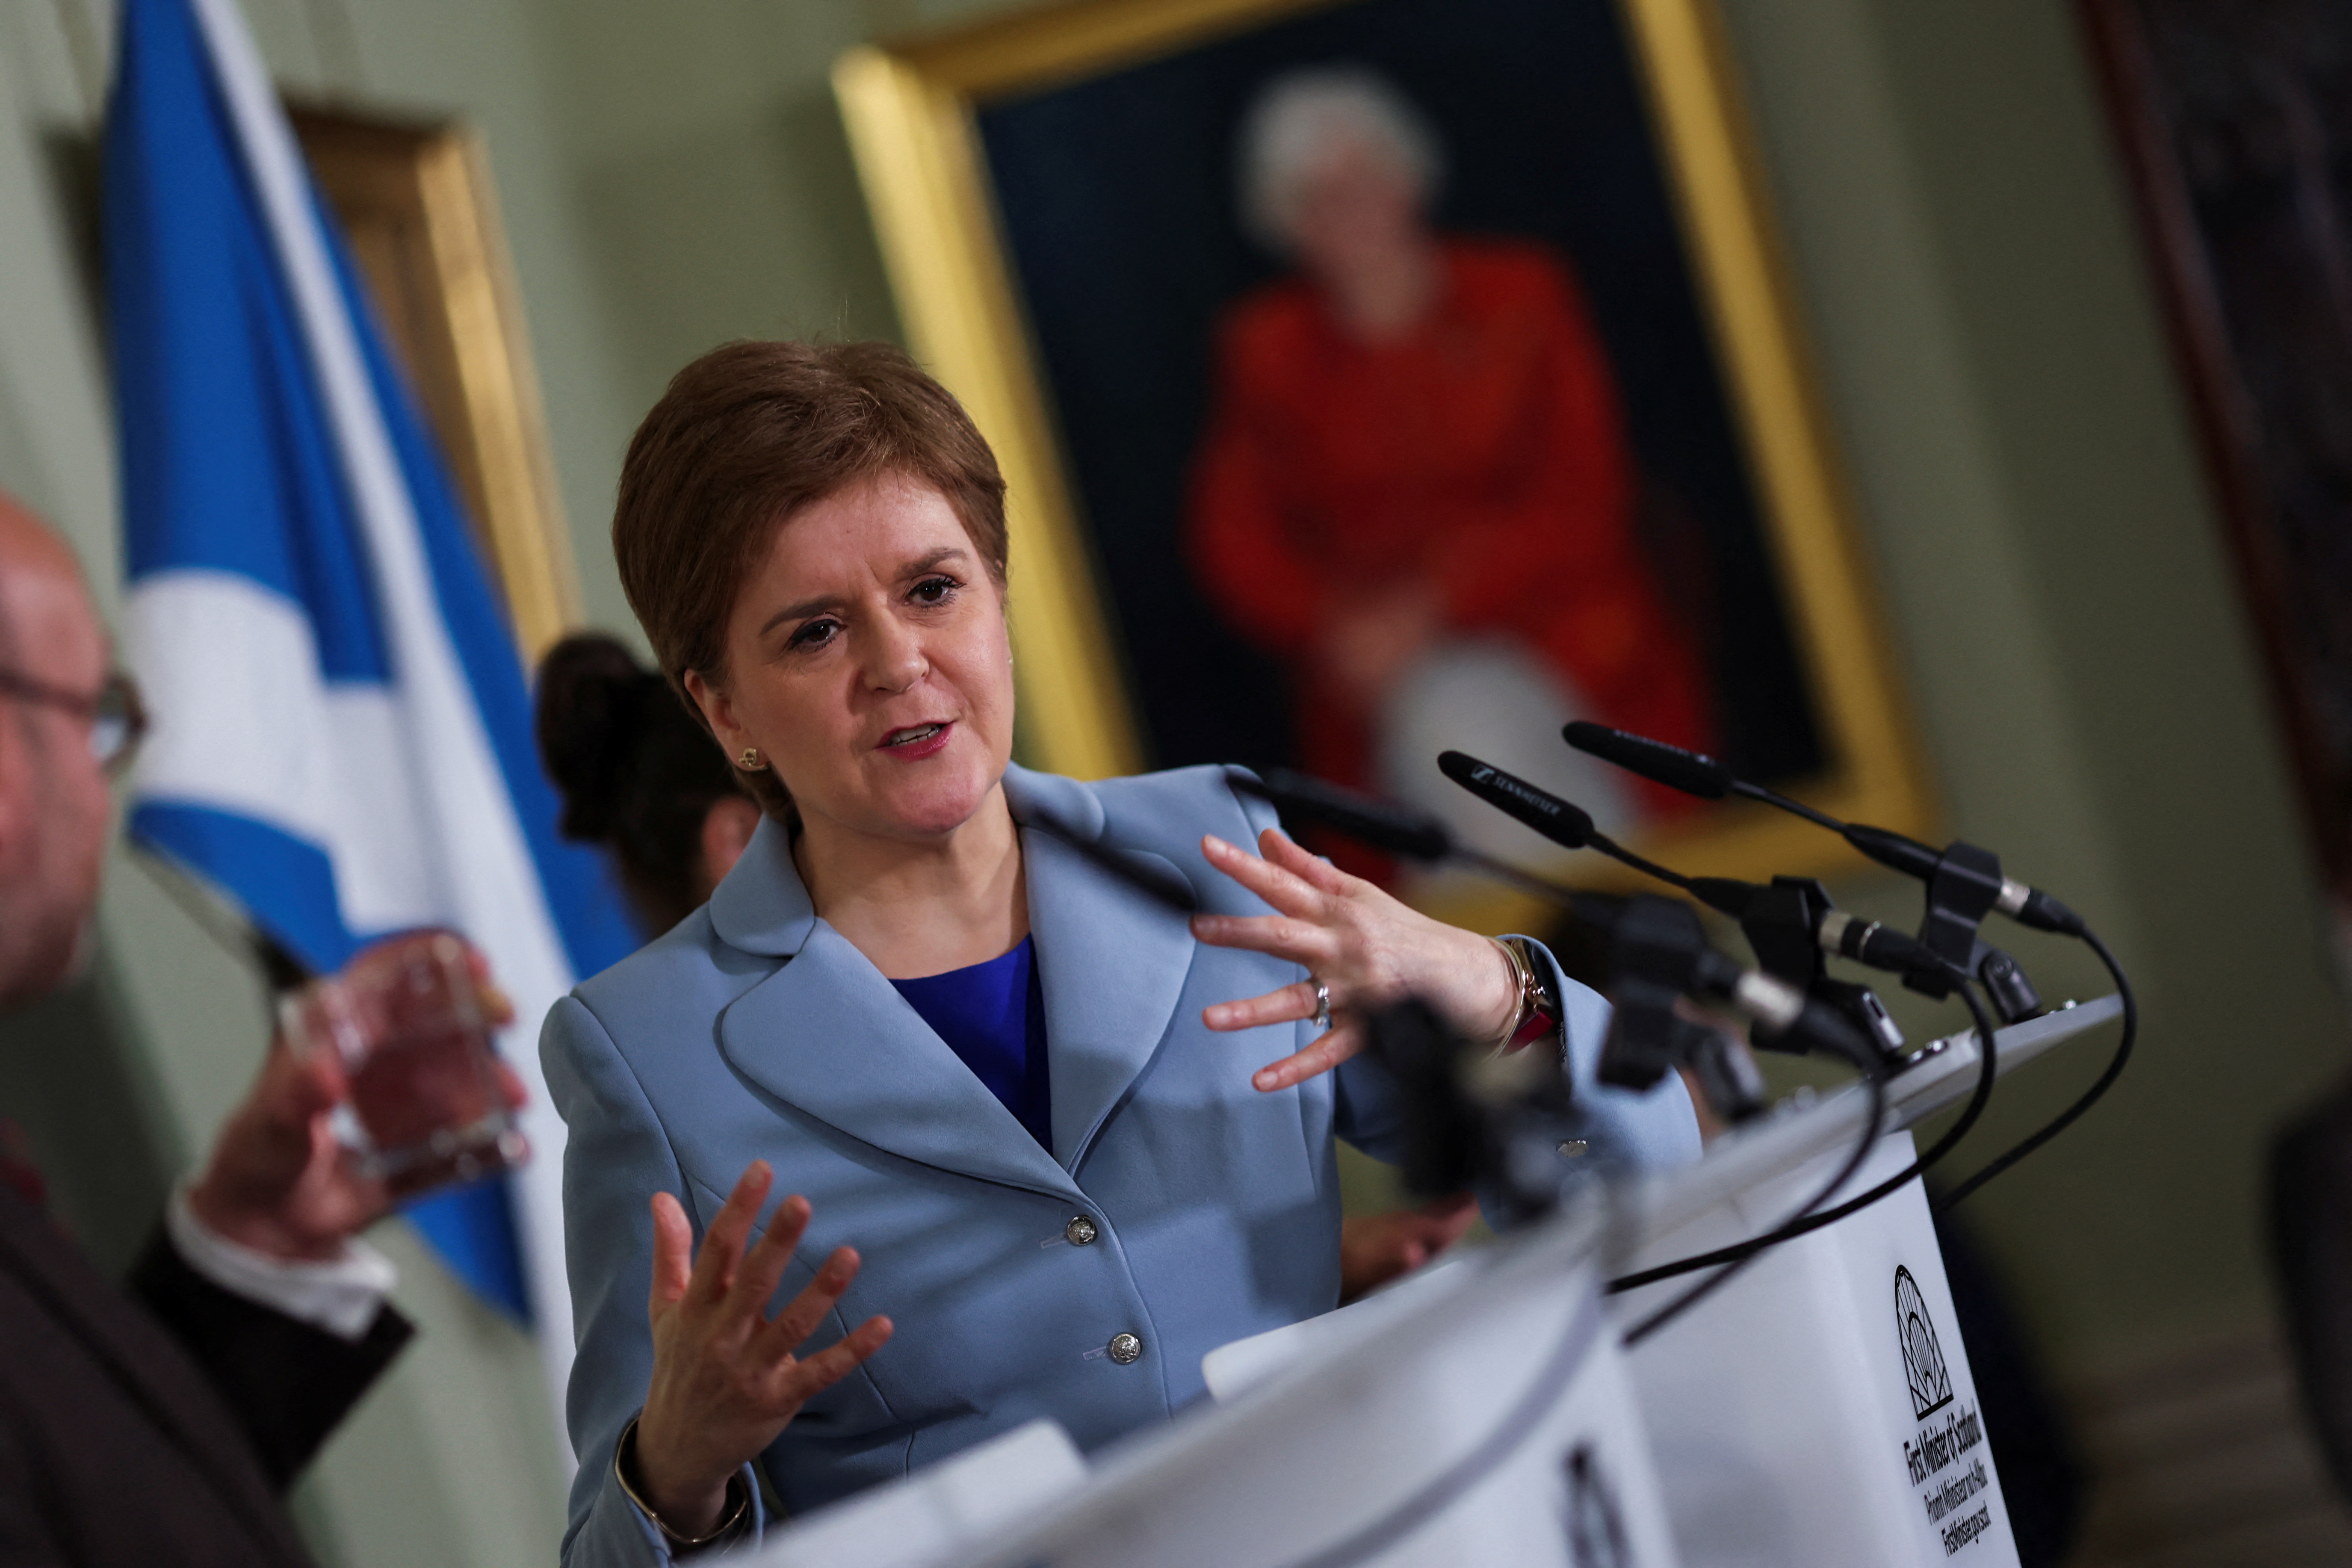 Scotland's First Minister Sturgeon holds news conference on proposed second referendum on Scottish independence, in Edinburgh